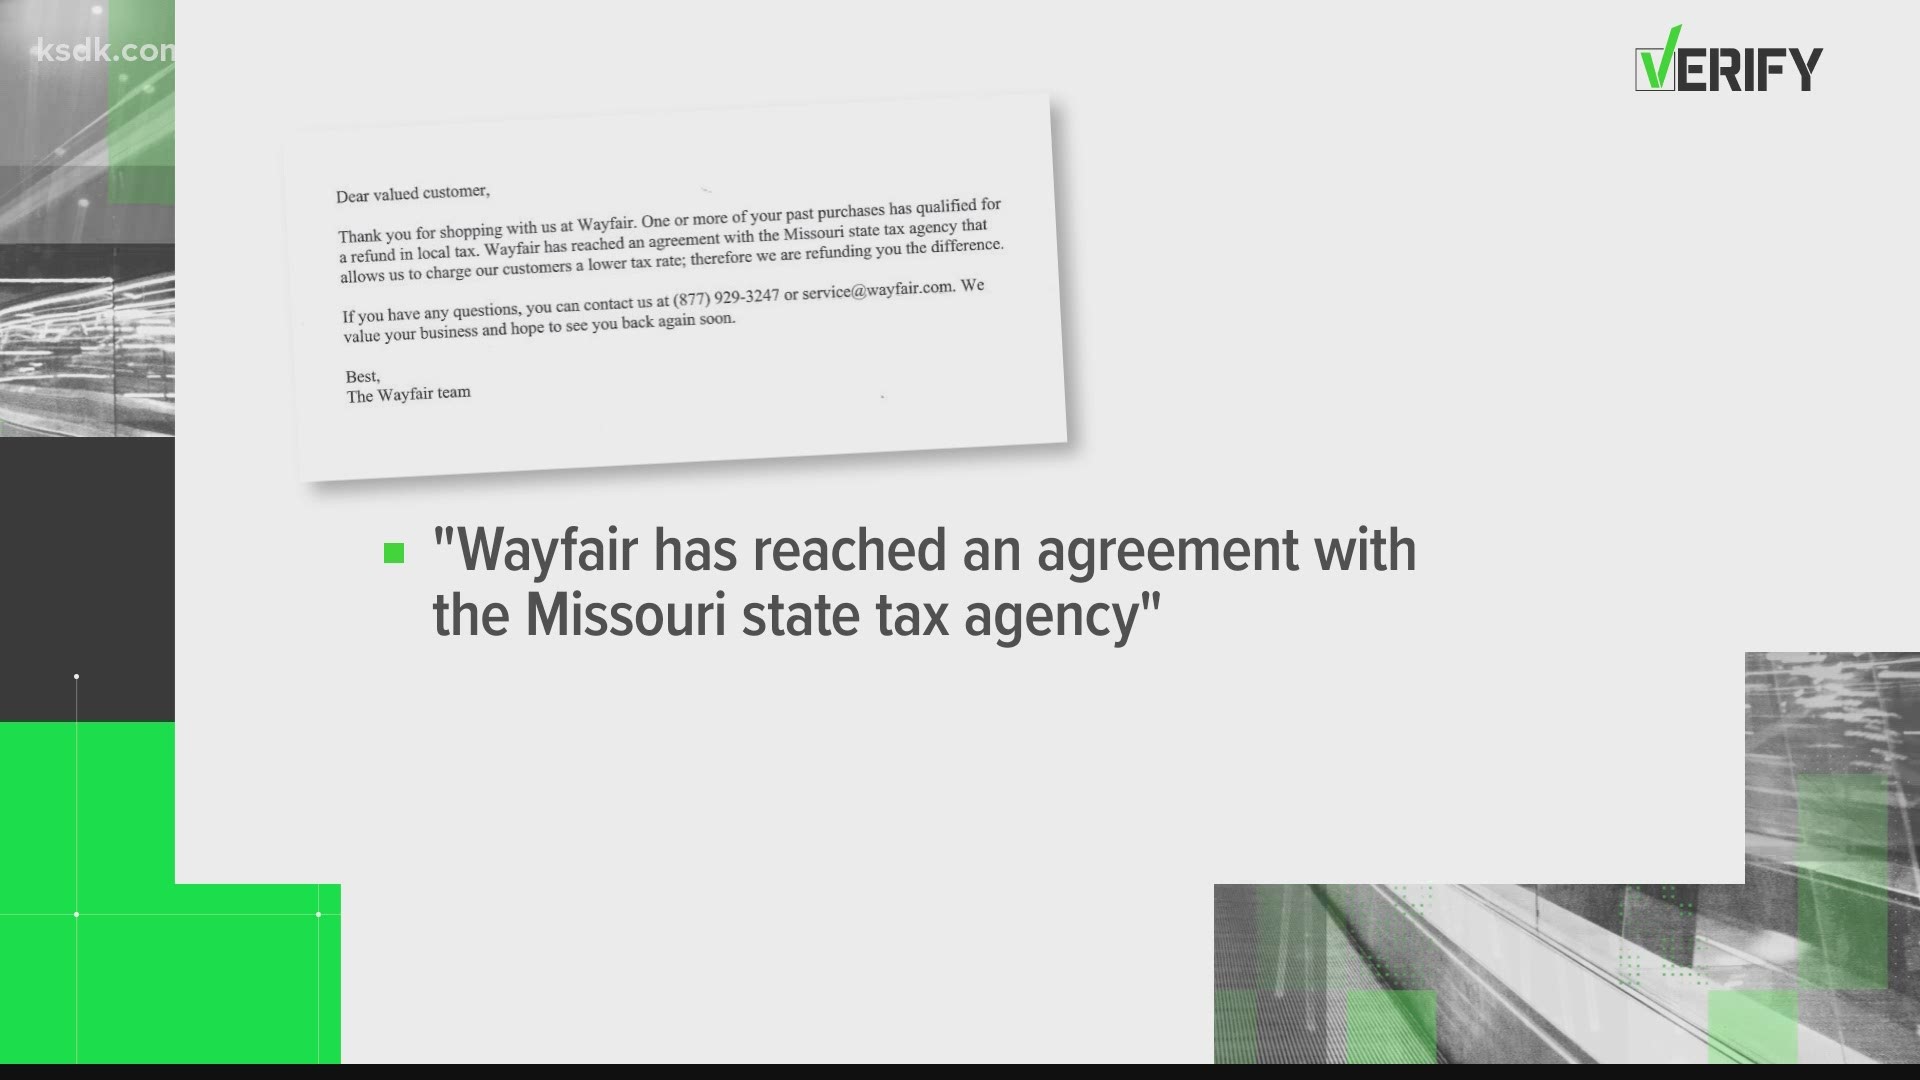 Several Missourians recently received checks in the mail from the online retailer Wayfair. The company and the state's department of revenue said they are real